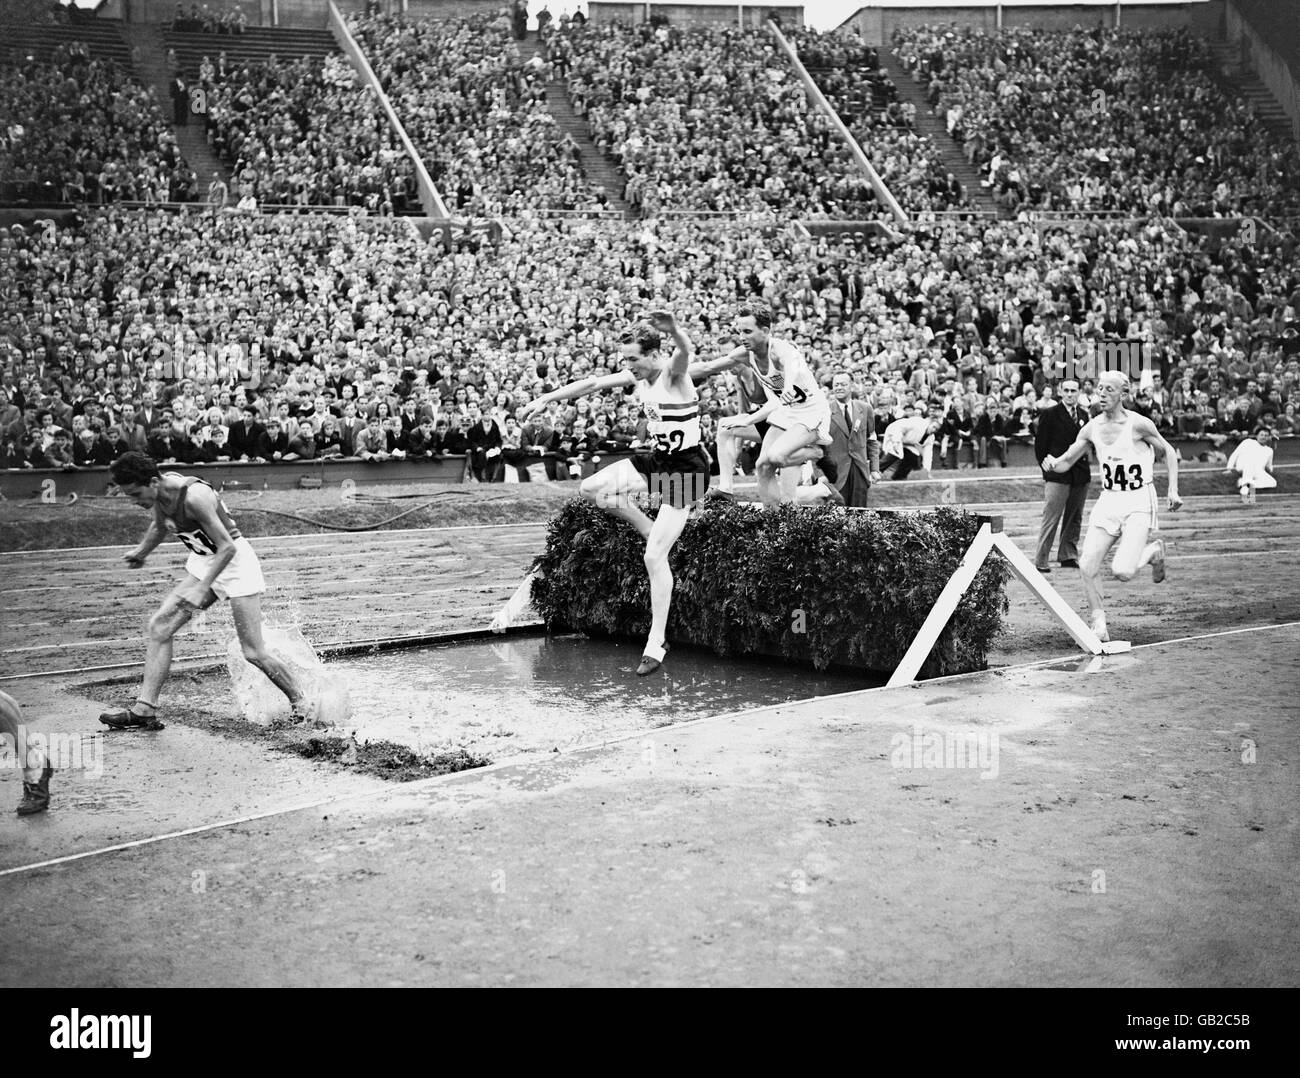 London Olympic Games 1948 - Athletics - Steeplechase - Wembley. Competitors going over one of the water jumps during one of the heats of the men's 3000m Steeplechase. Stock Photo